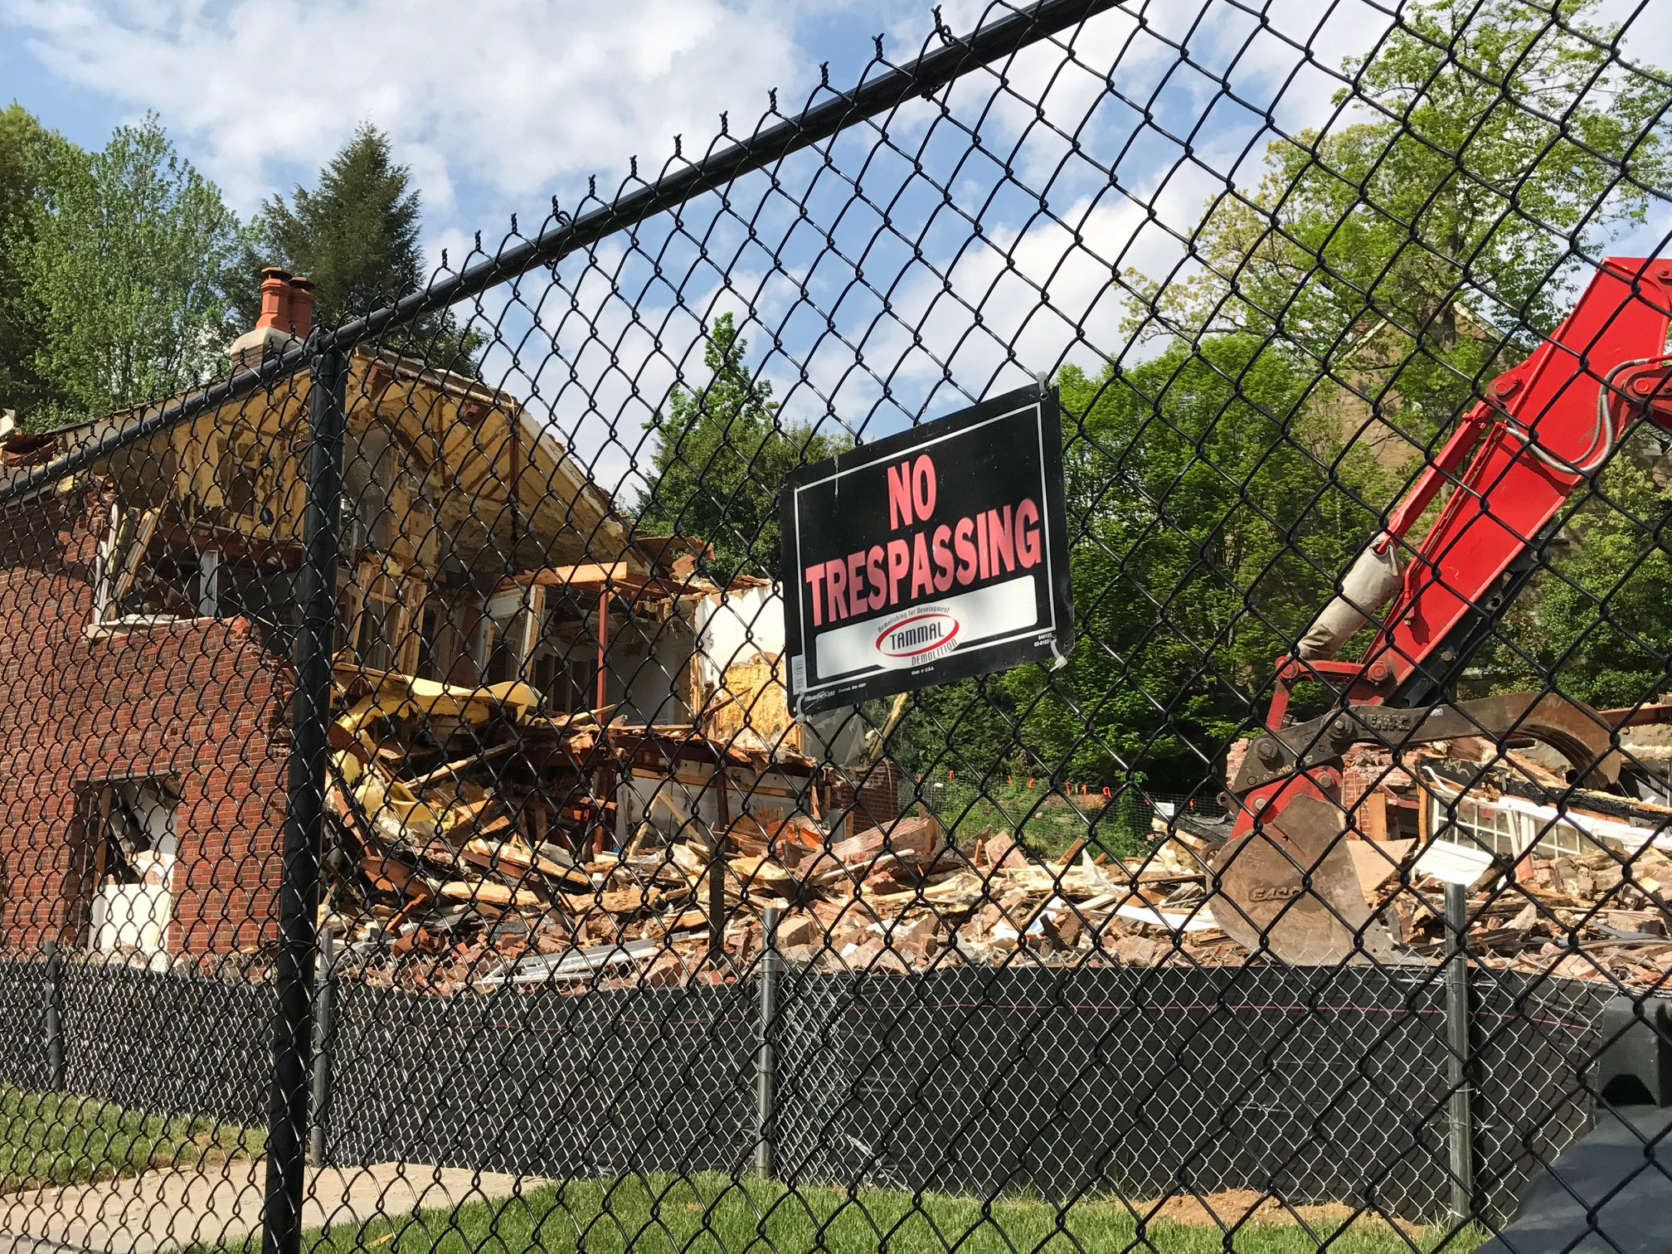 Construction crews begin to tear down a posh D.C. house that was the scene of a 2015 quadruple homicide on Friday, April 21, 2017. The house sold for $3 million months after Savvas and Amy Savopoulos, their son Philip and housekeeper Vera Figueroa were killed. (WTOP/Megan Cloherty)